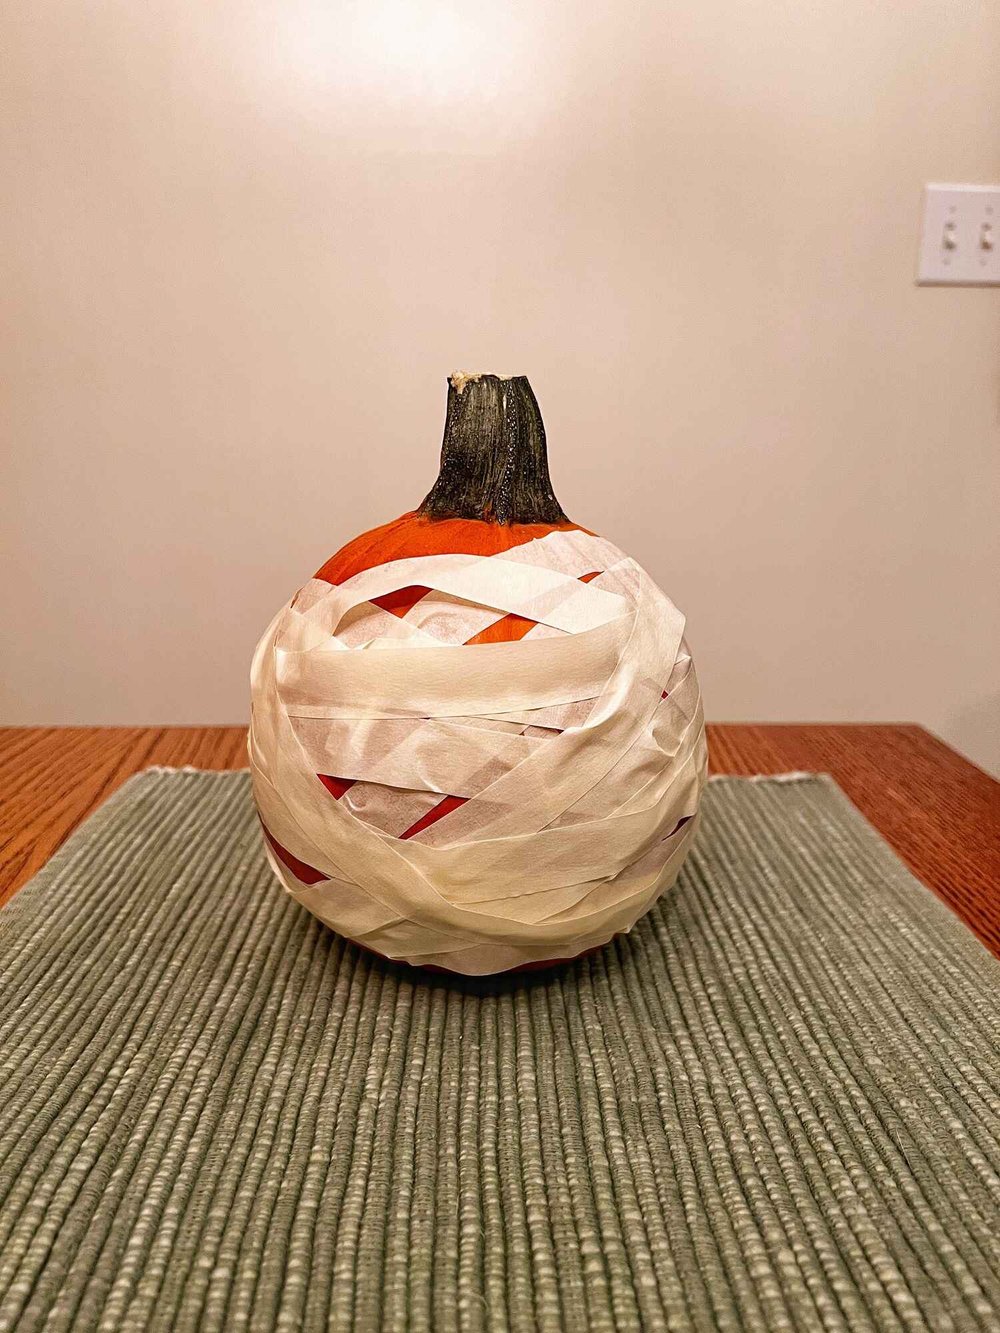 No Carve Pumpkin Decorating Ideas for Your Toddler - Masking Tape Mummy